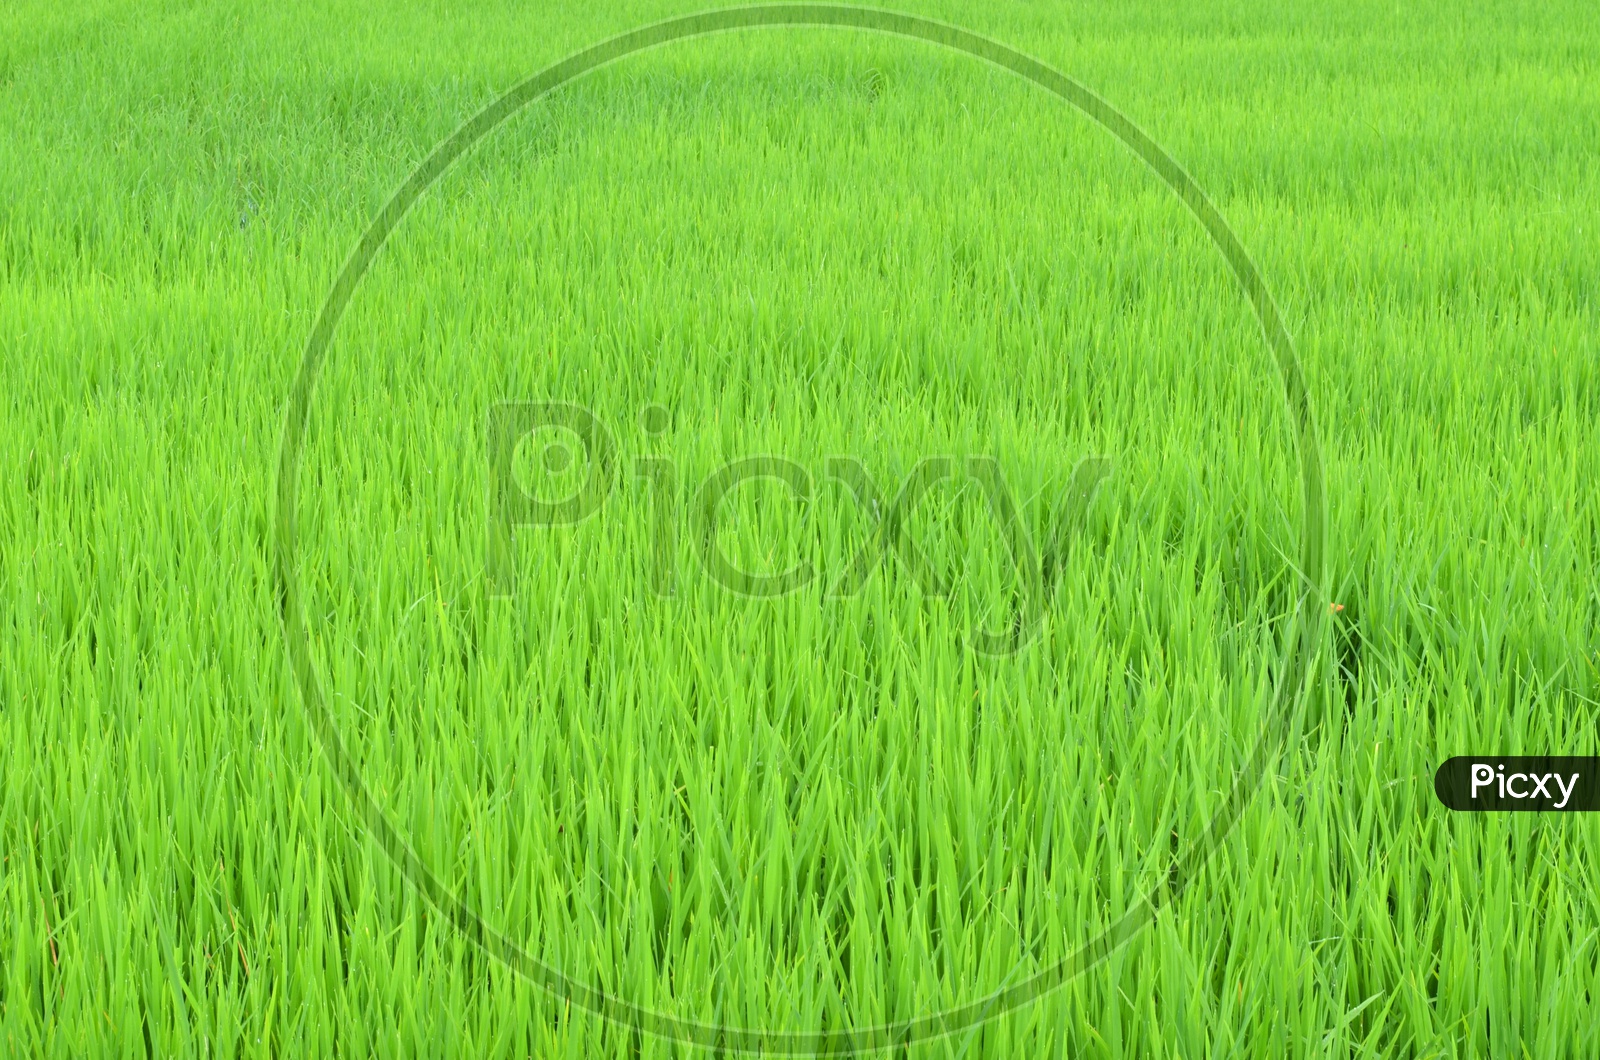 Paddy Or Rice Fields Forming a Background